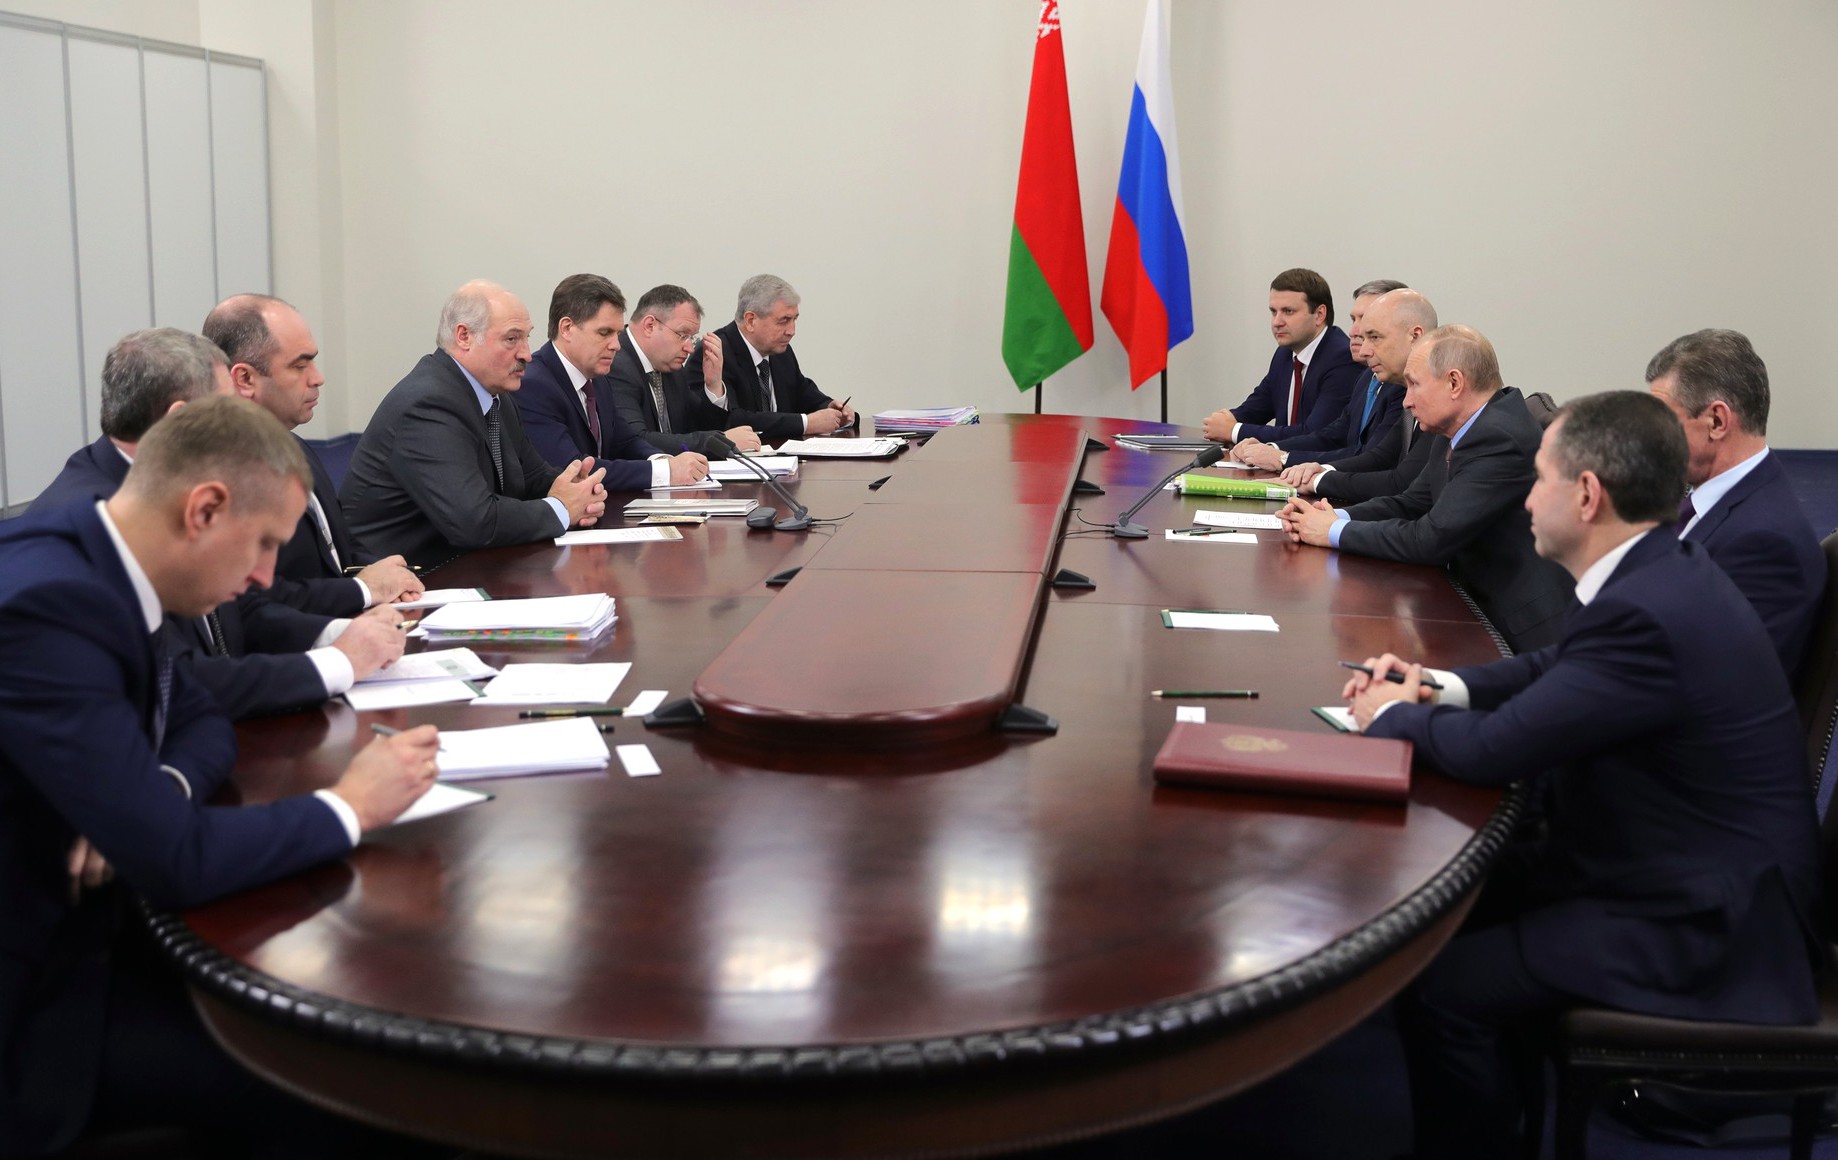 Government has prepared an Integration Programme with Russia and sectoral roadmaps for the unification of framework conditions